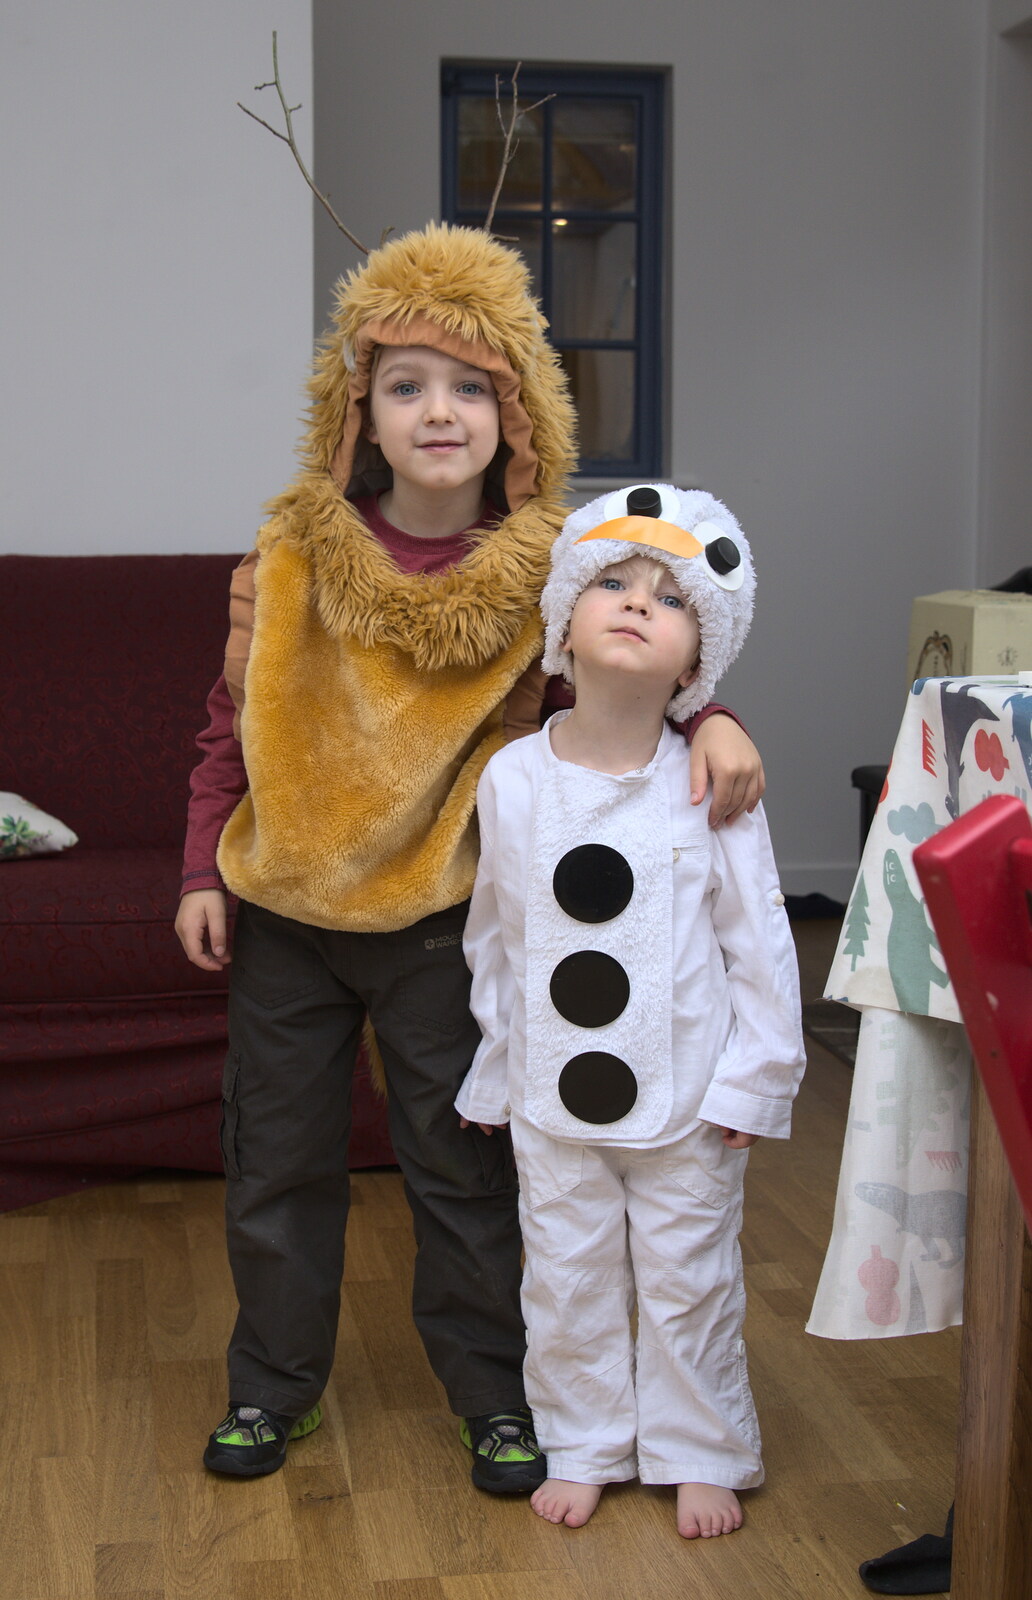 Fred and Gabes are dressed up for a party from November Singing, Gislingham Primary School, Suffolk - 17th November 2014